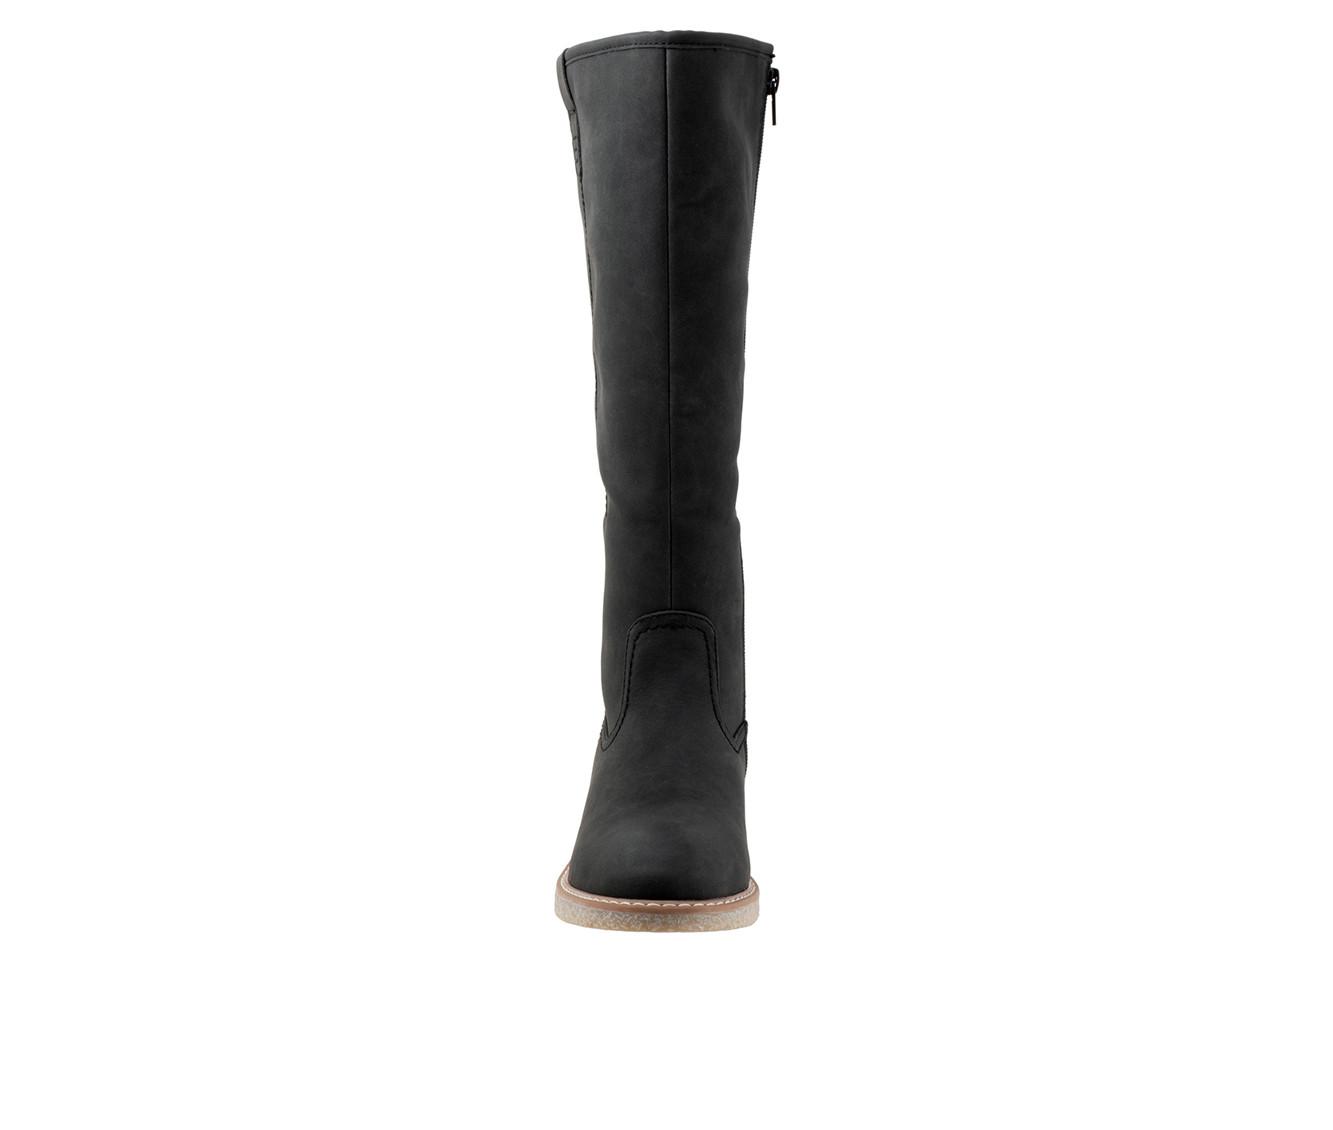 Women's Los Cabos Bonnie Knee High Boots